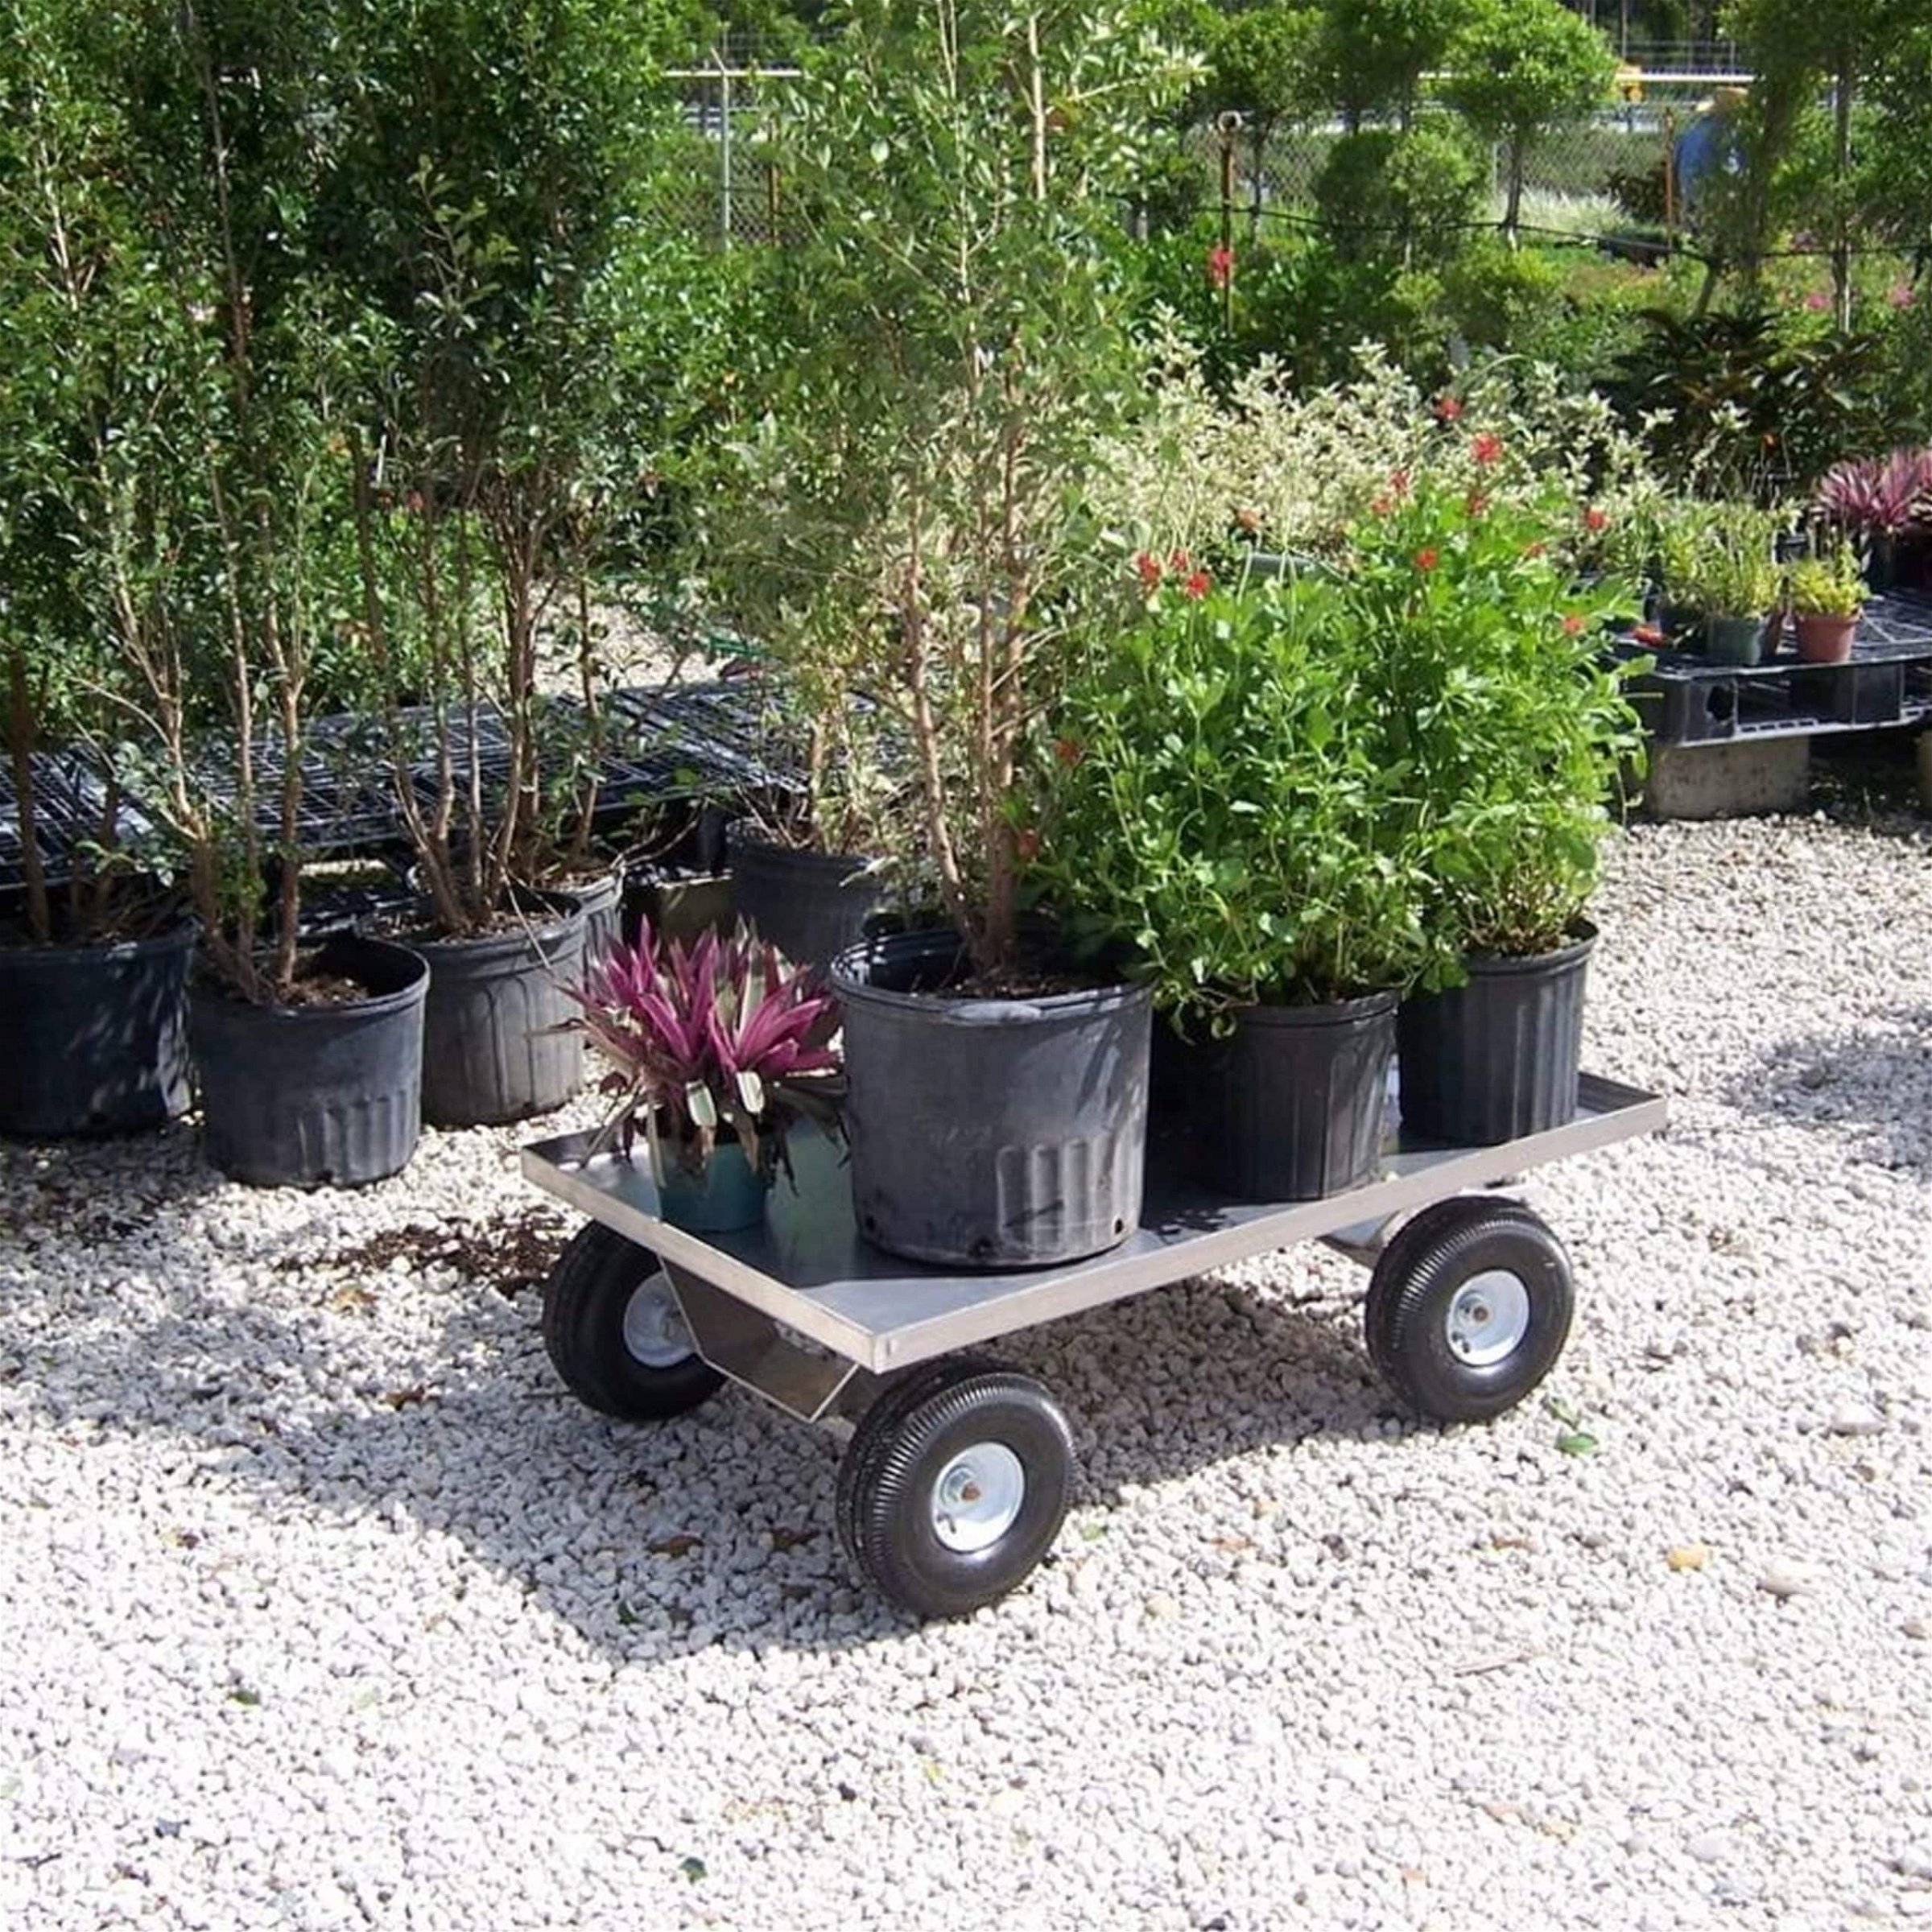 All Aluminum Pull Wagon from Kahuna Wagons loaded full of potted plants.